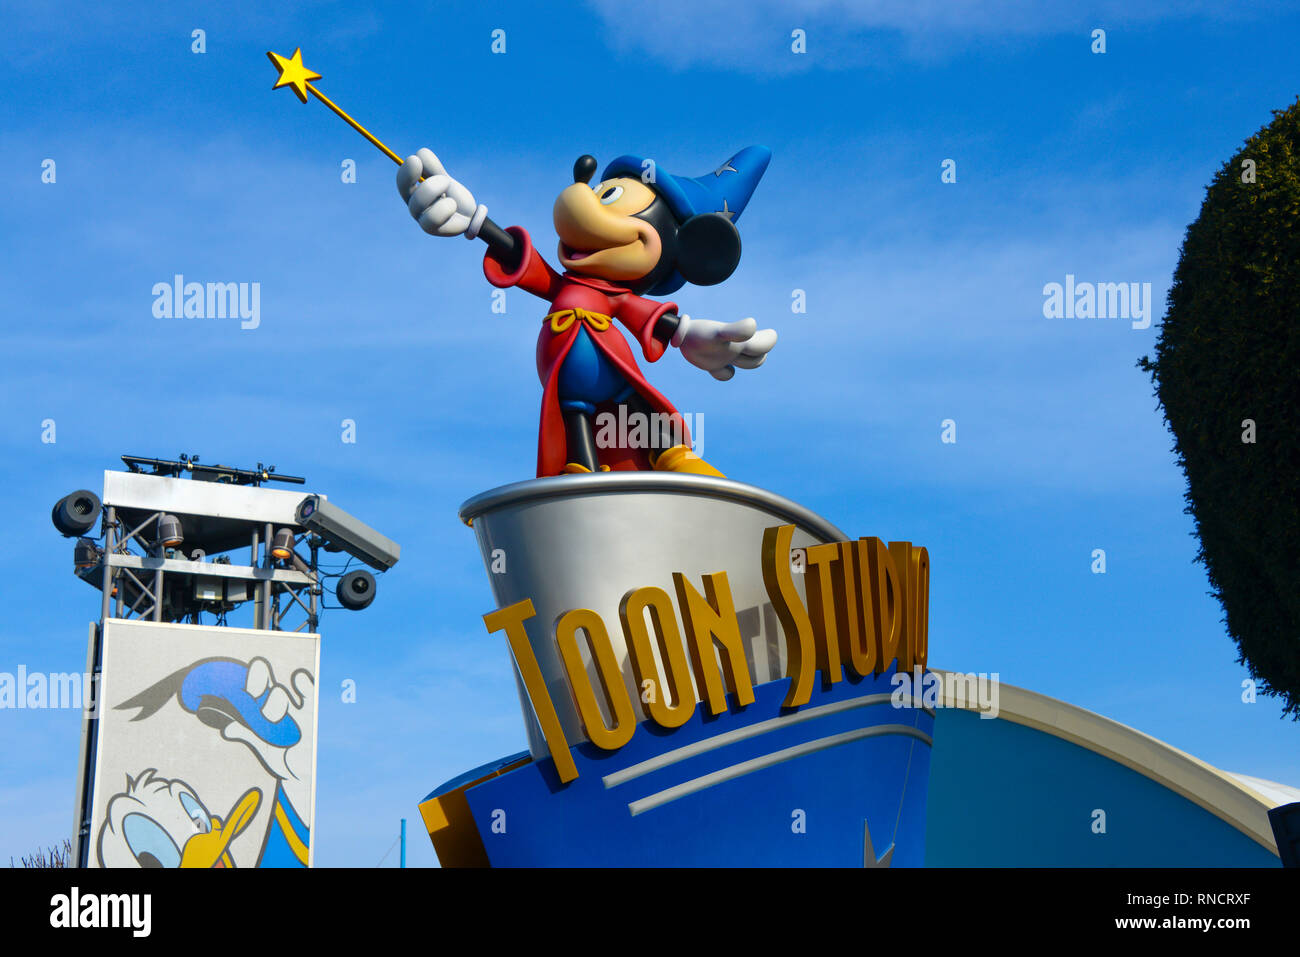 FRANCE, PARIS - February 28, 2016 - View of the Wizard Mickey Mouse, from the movie Fantasia, welcoming us to the Disney studios. Stock Photo